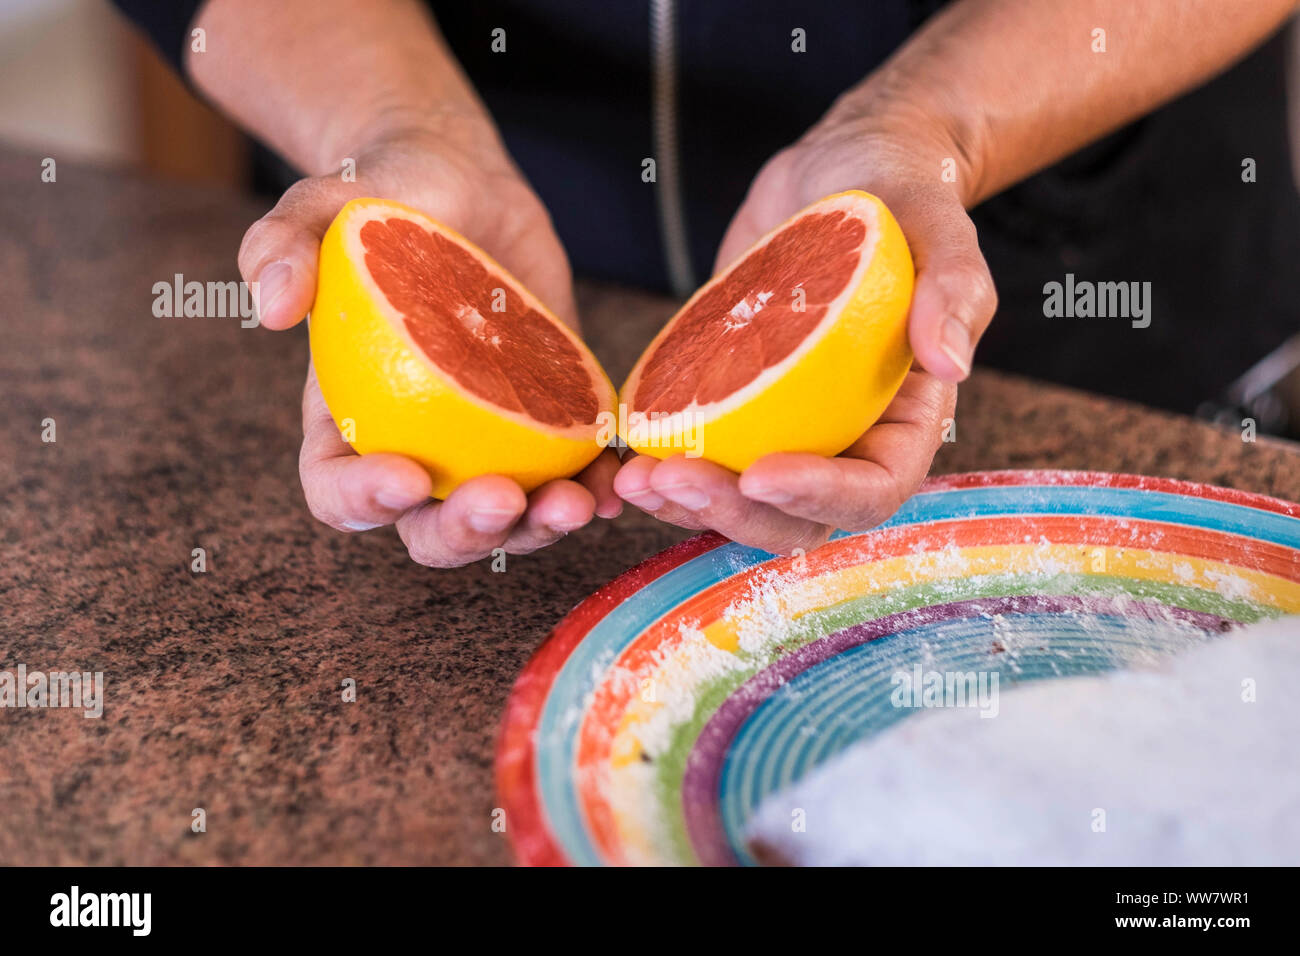 fresh food fruit grapefruit colored, half opened taken by hands on the table ready to eat seasonal products from the earth. healthy lifestyle Stock Photo